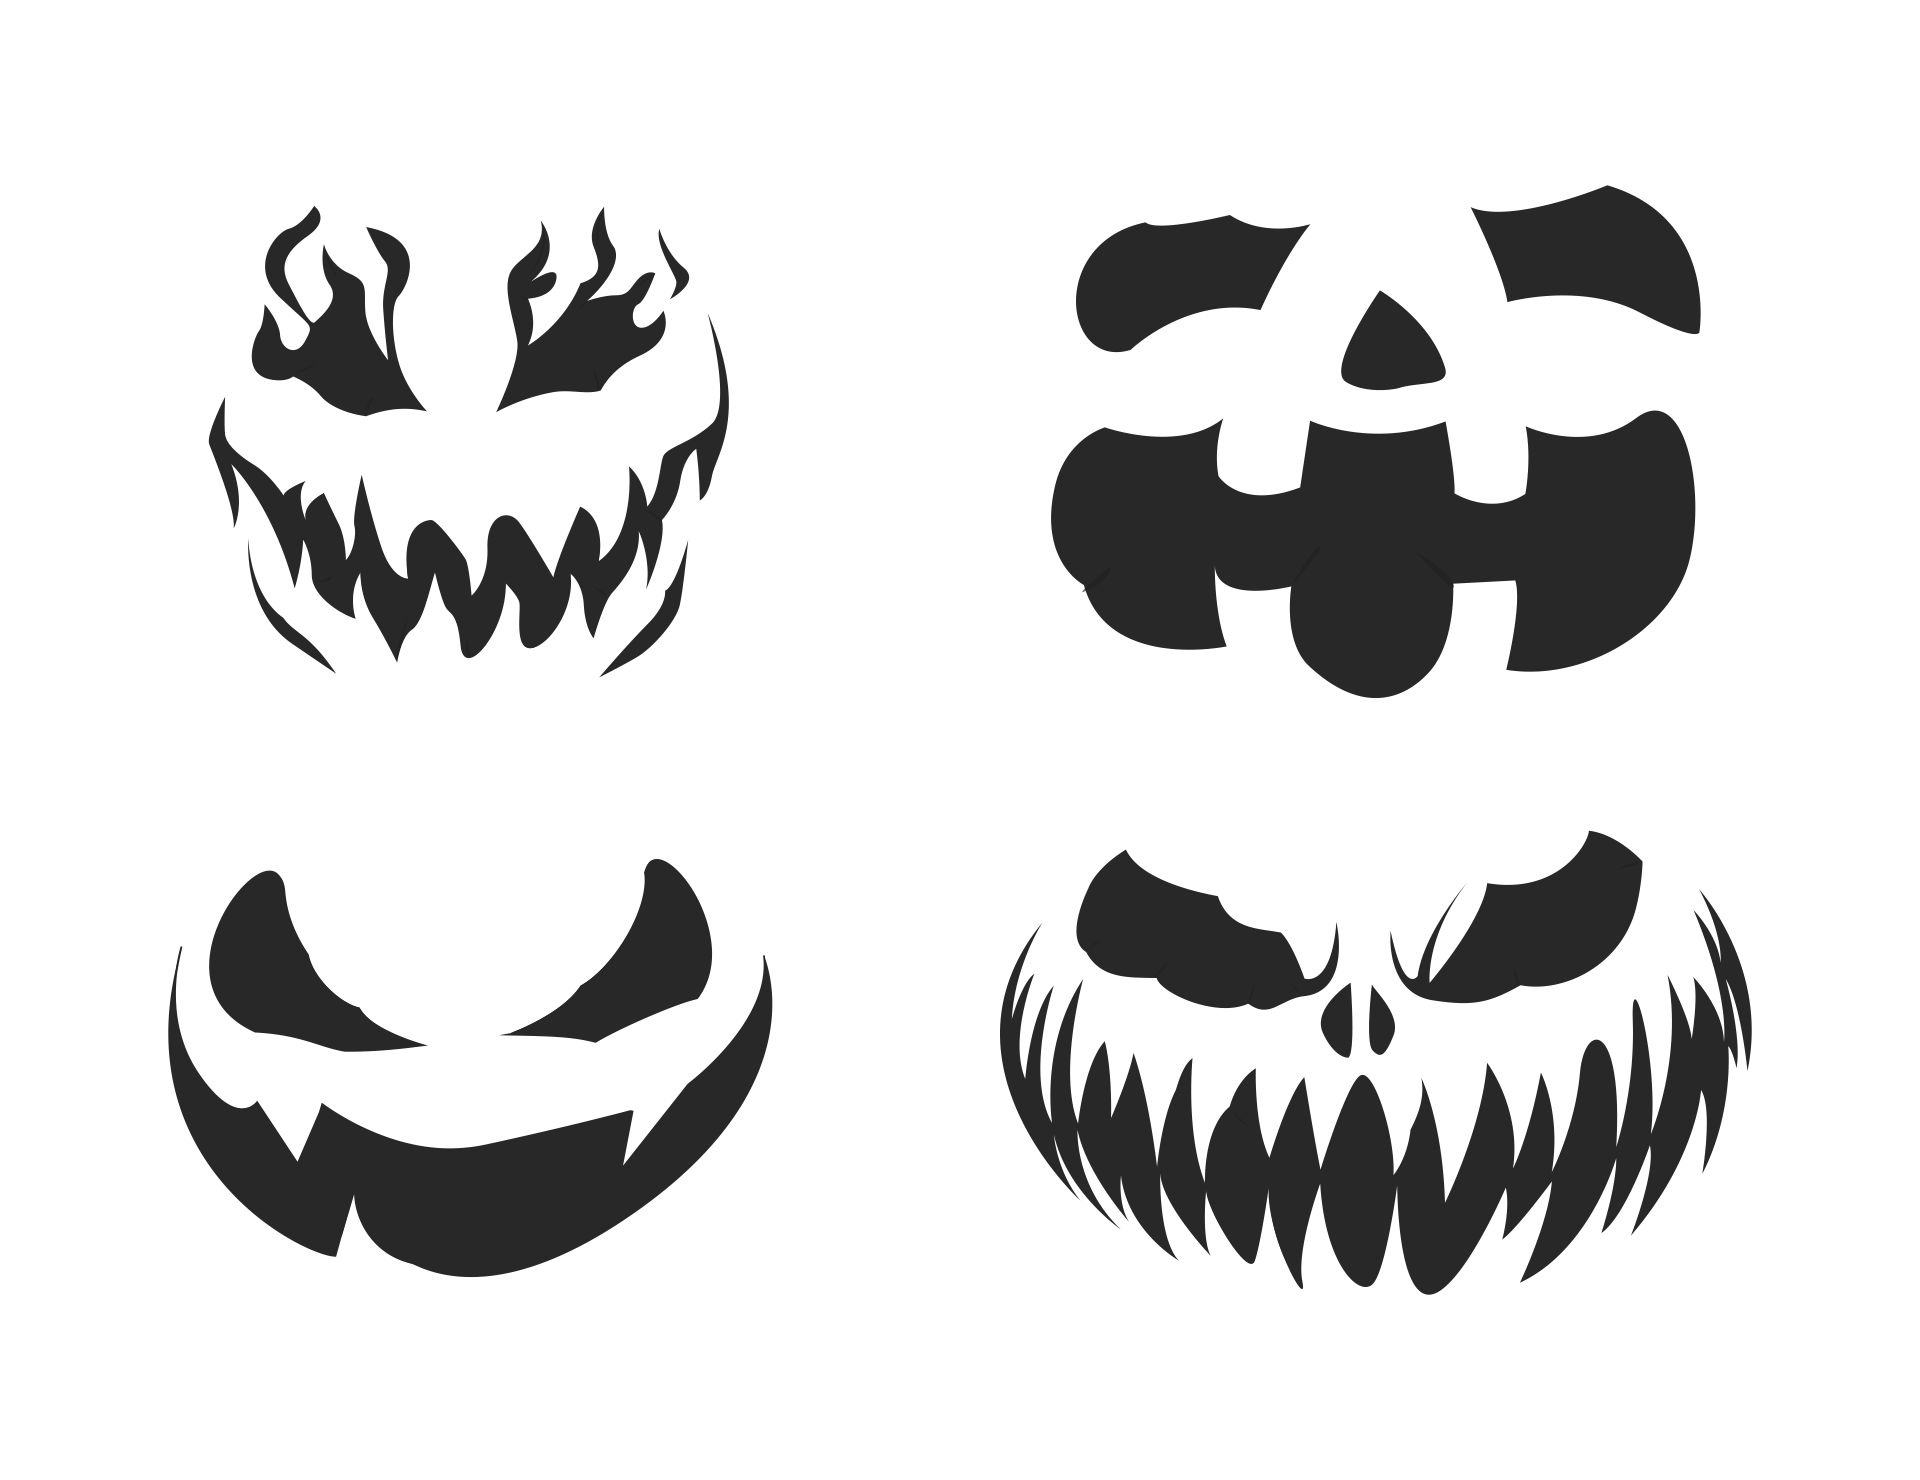 Printable Pumpkin Carving Stencil Faces Scary Spooky Halloween